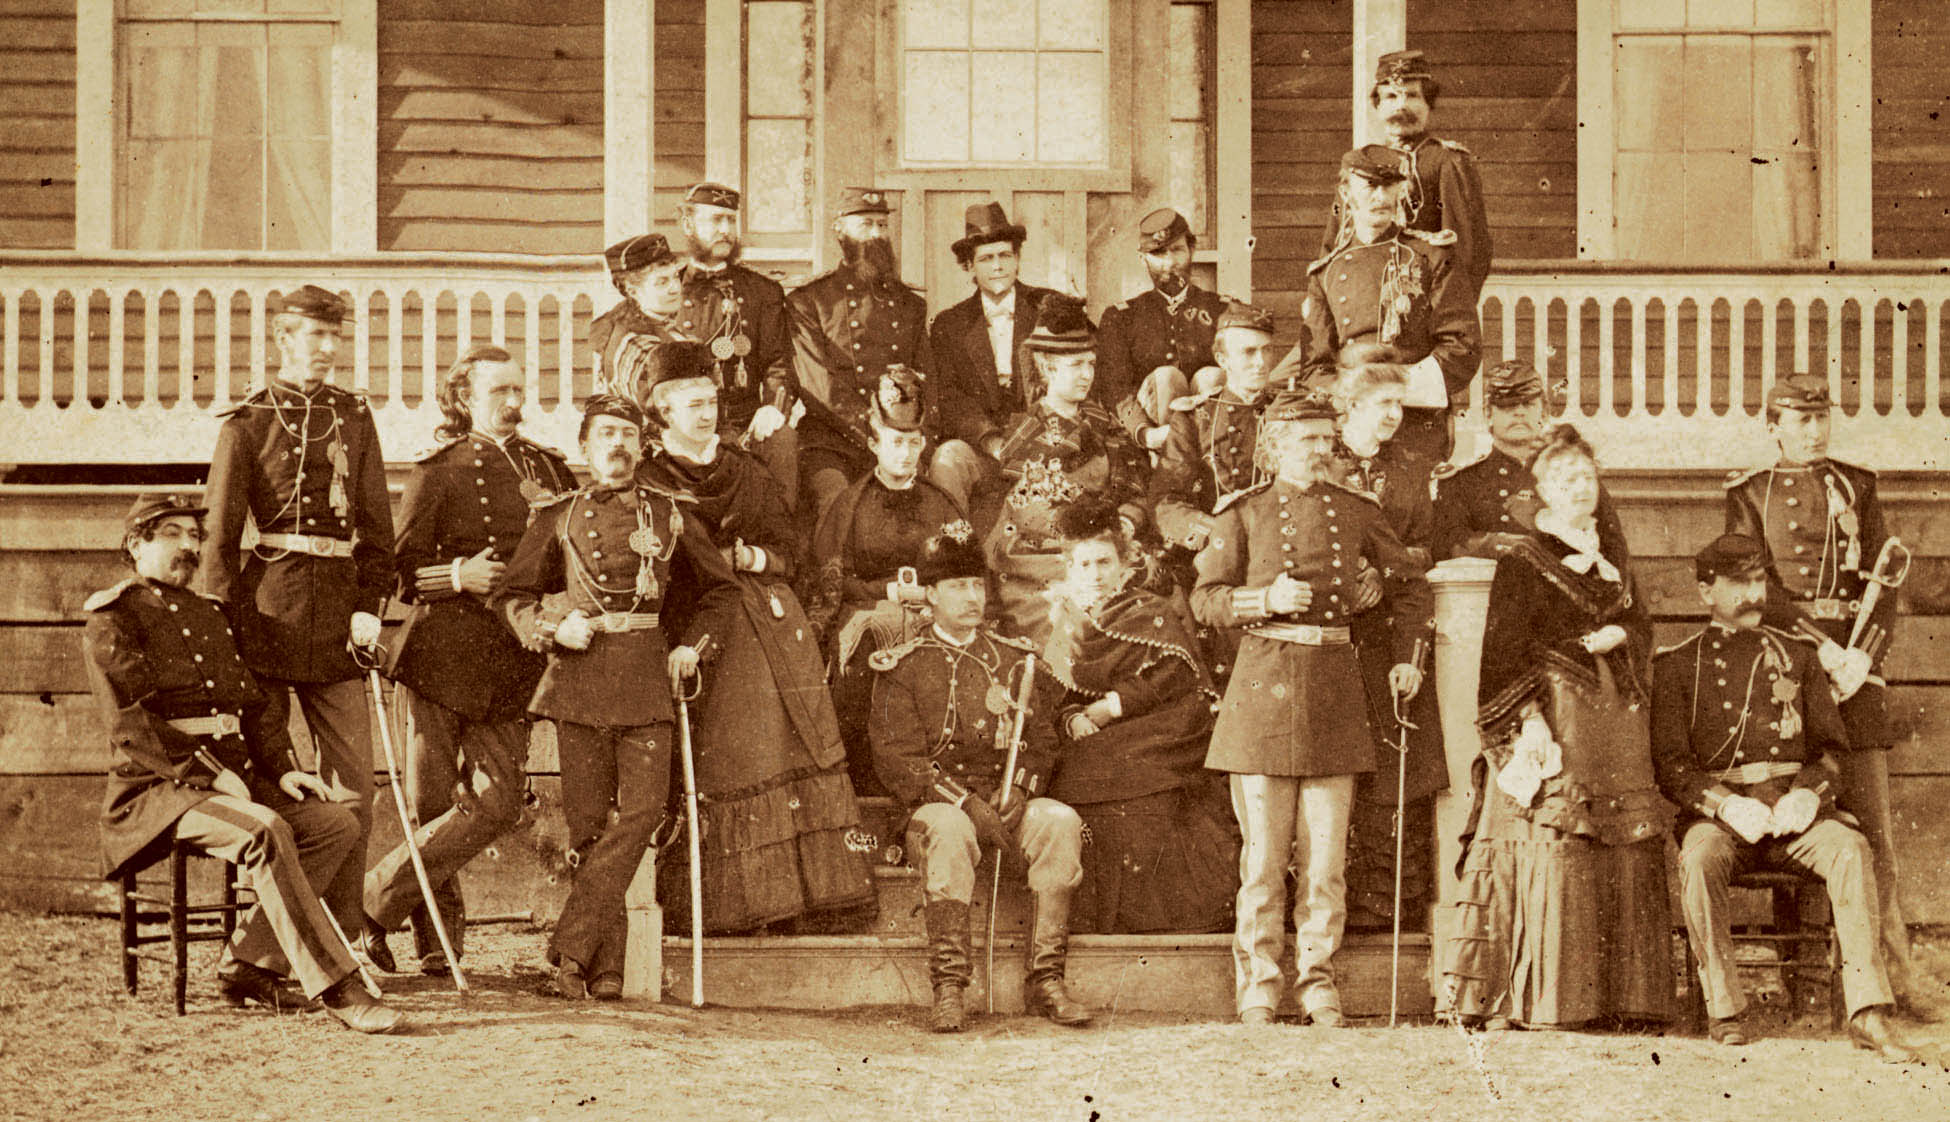 Group photo at Fort Abraham Lincoln